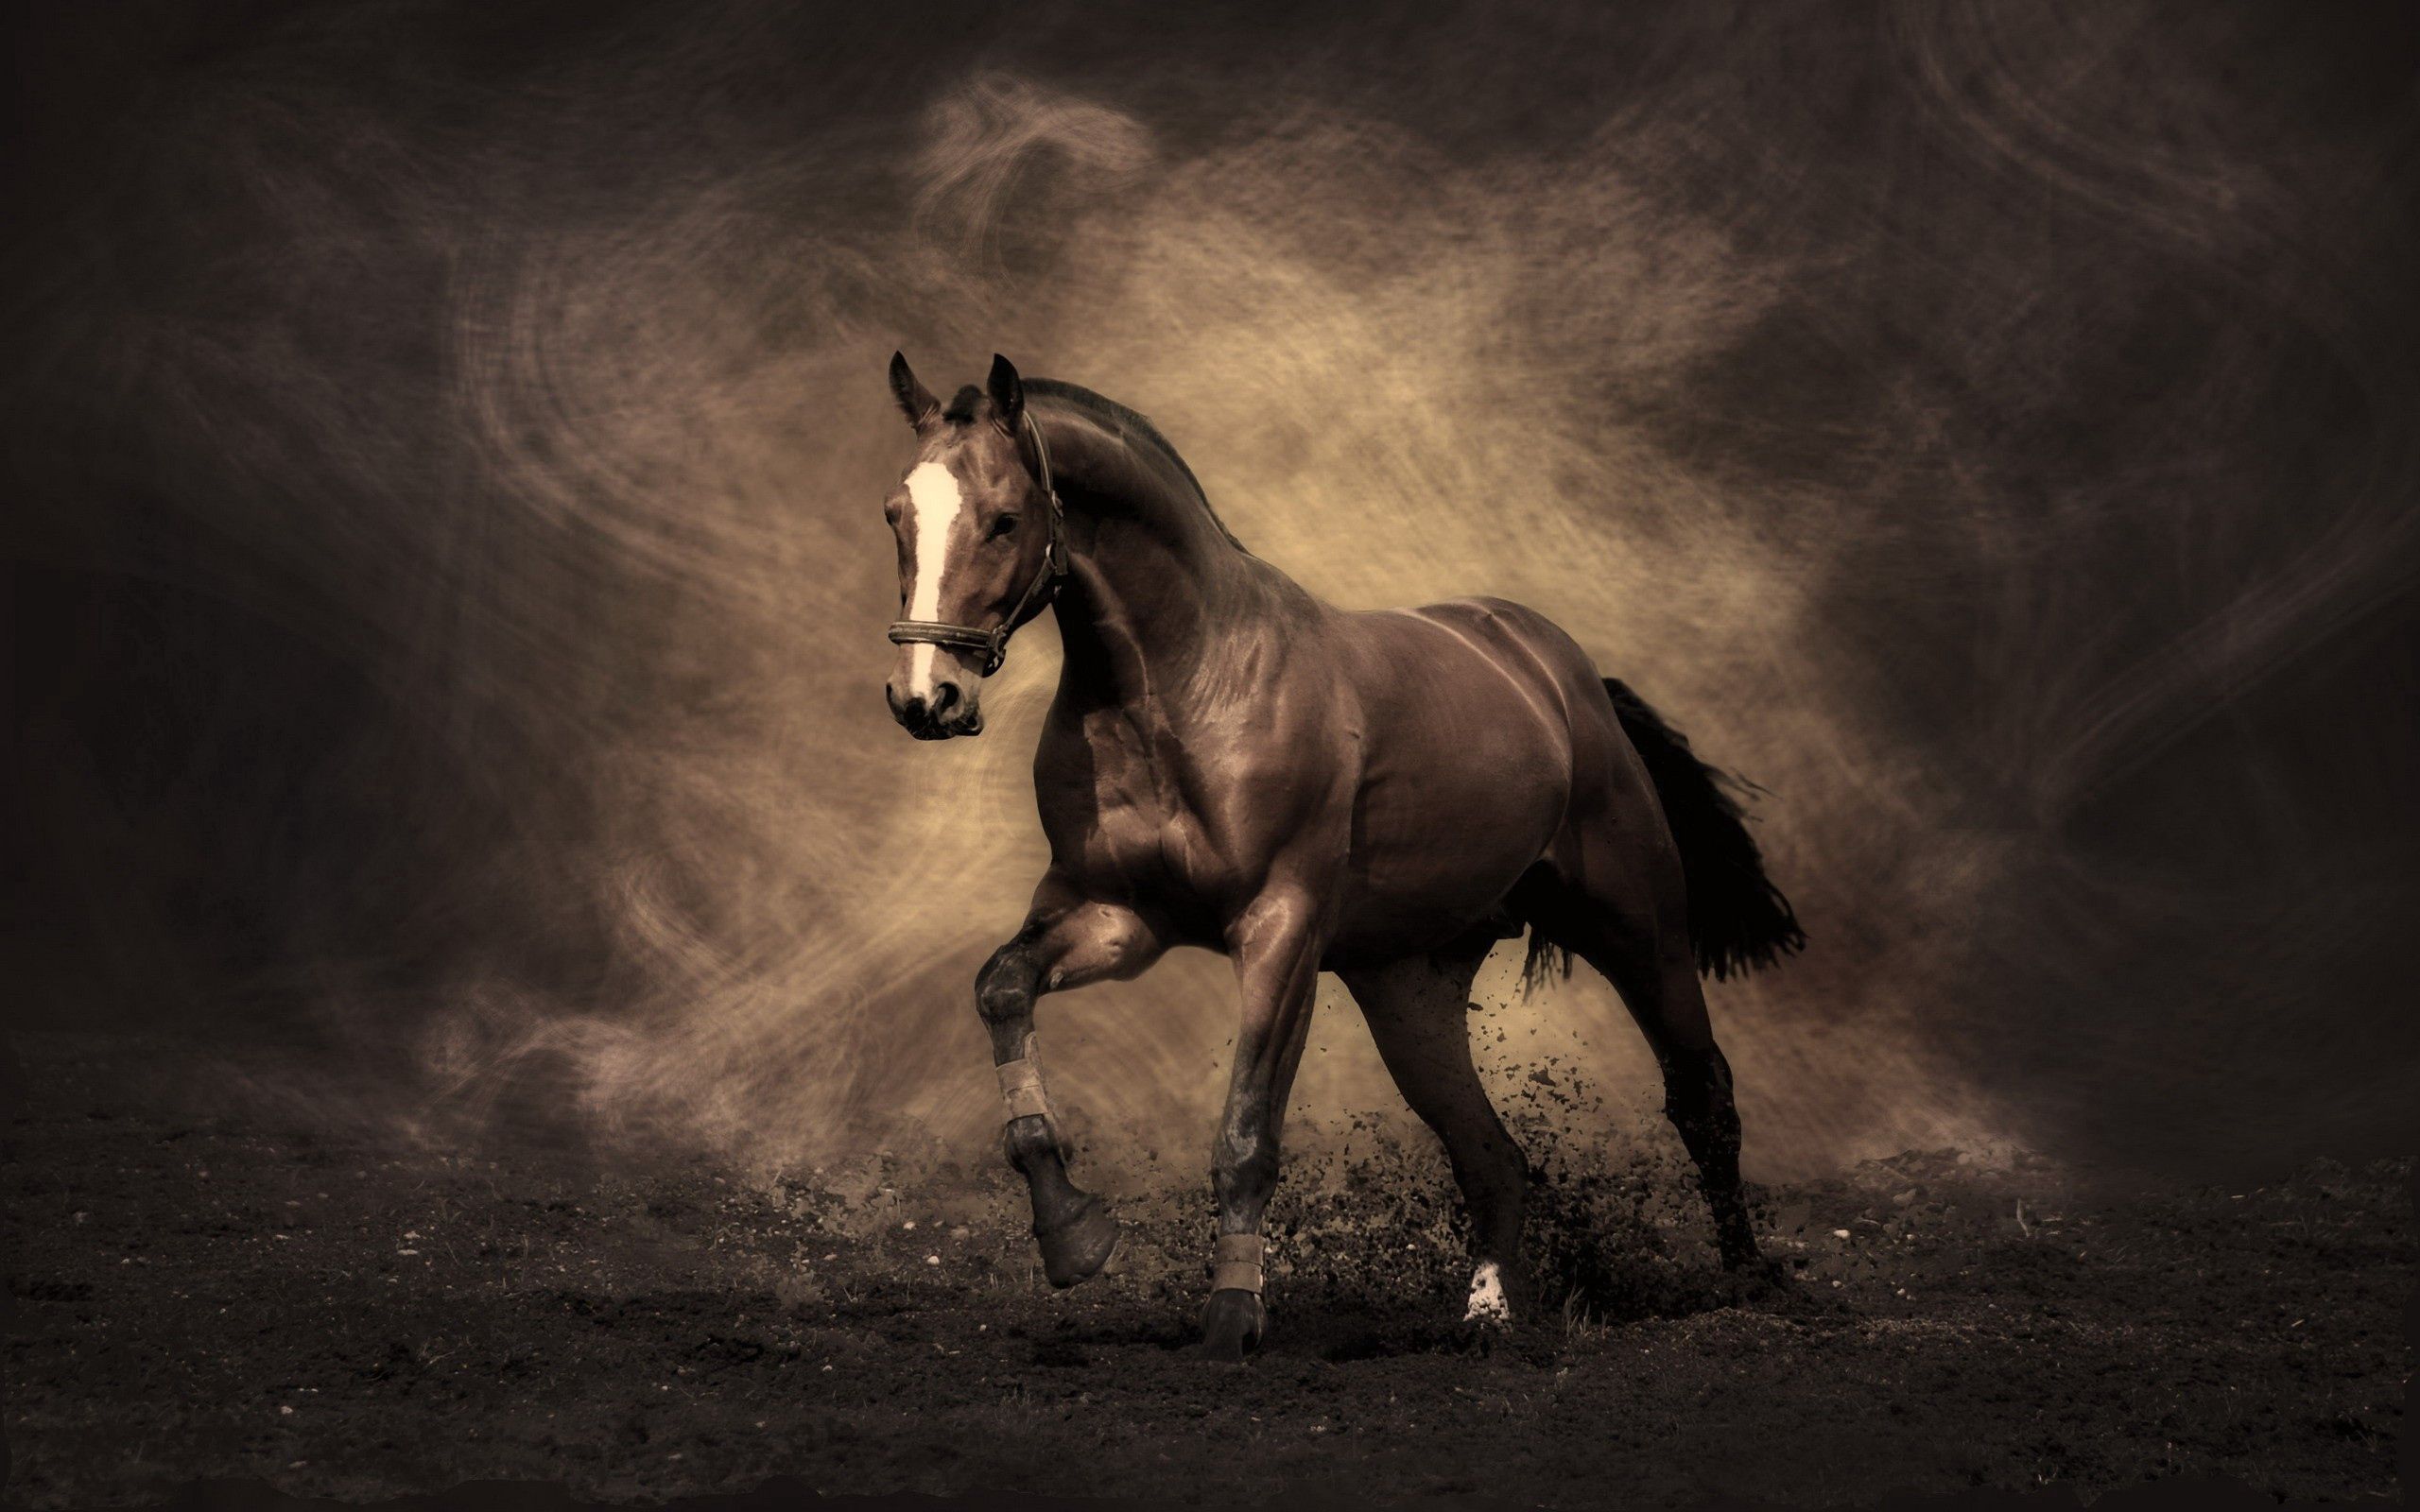 97509 download wallpaper animals, smoke, shadow, color, dust, horse screensavers and pictures for free